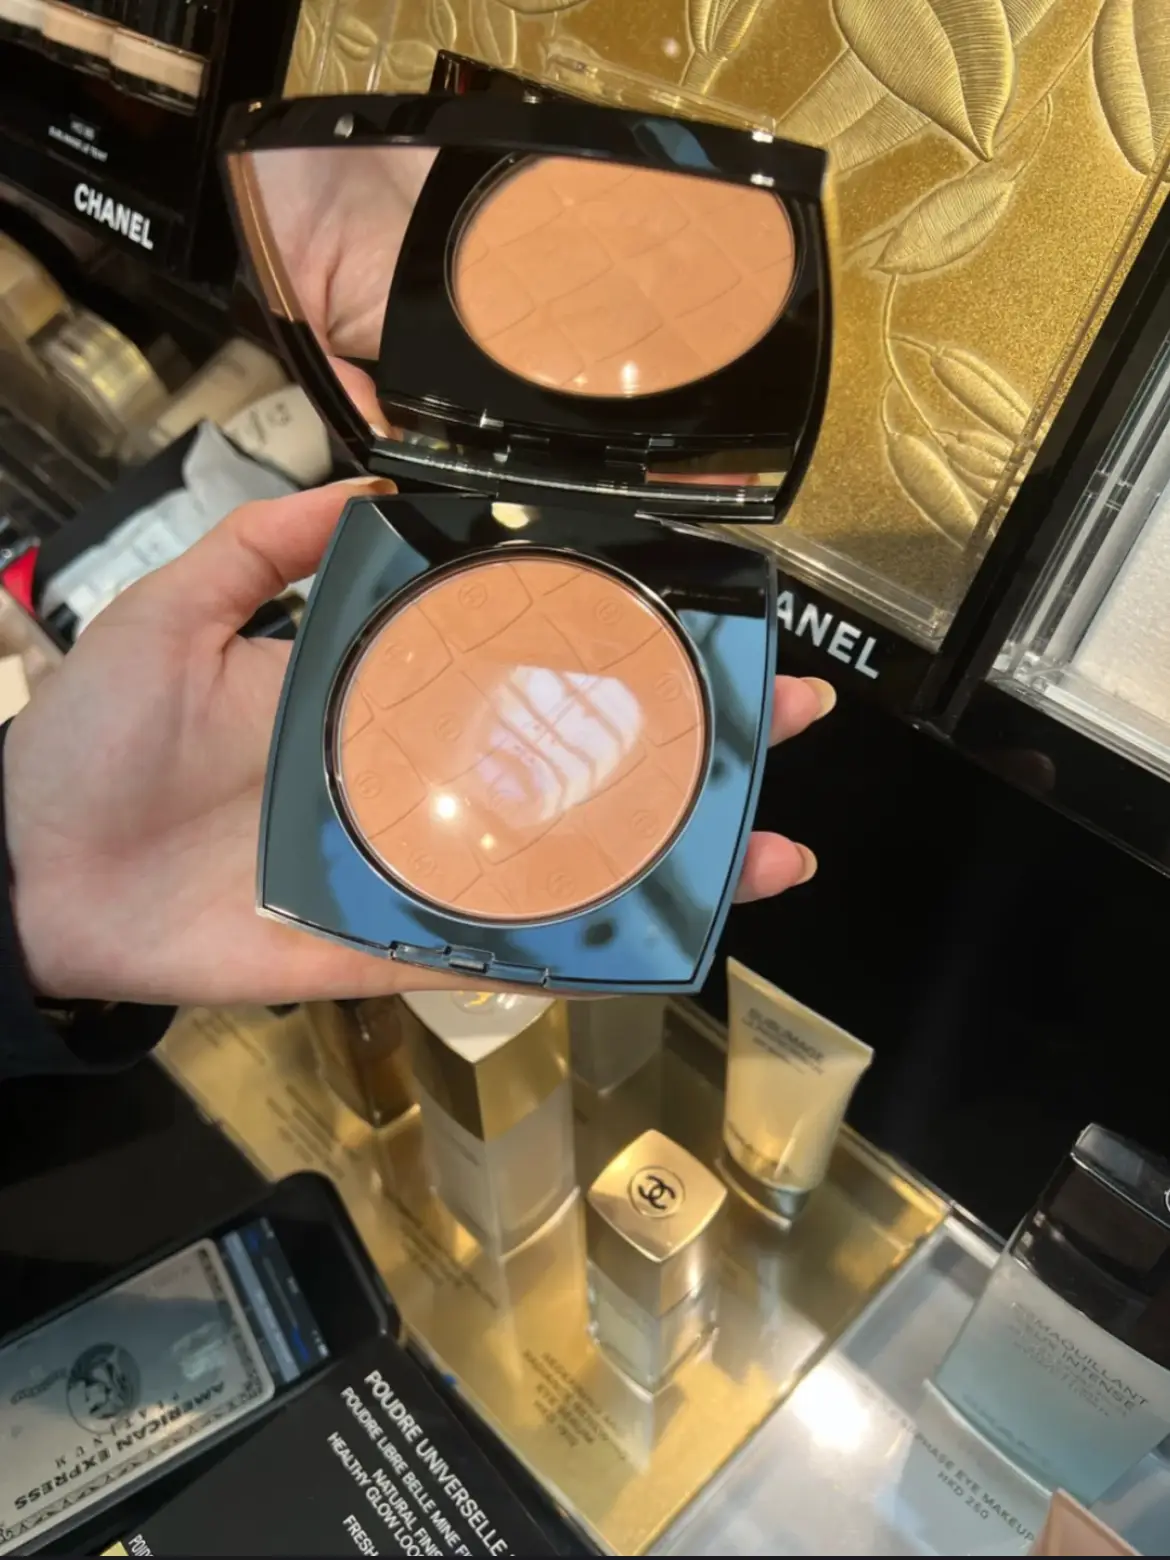 Best Chanel Foundation For Daily, Gallery posted by Halim Kartham